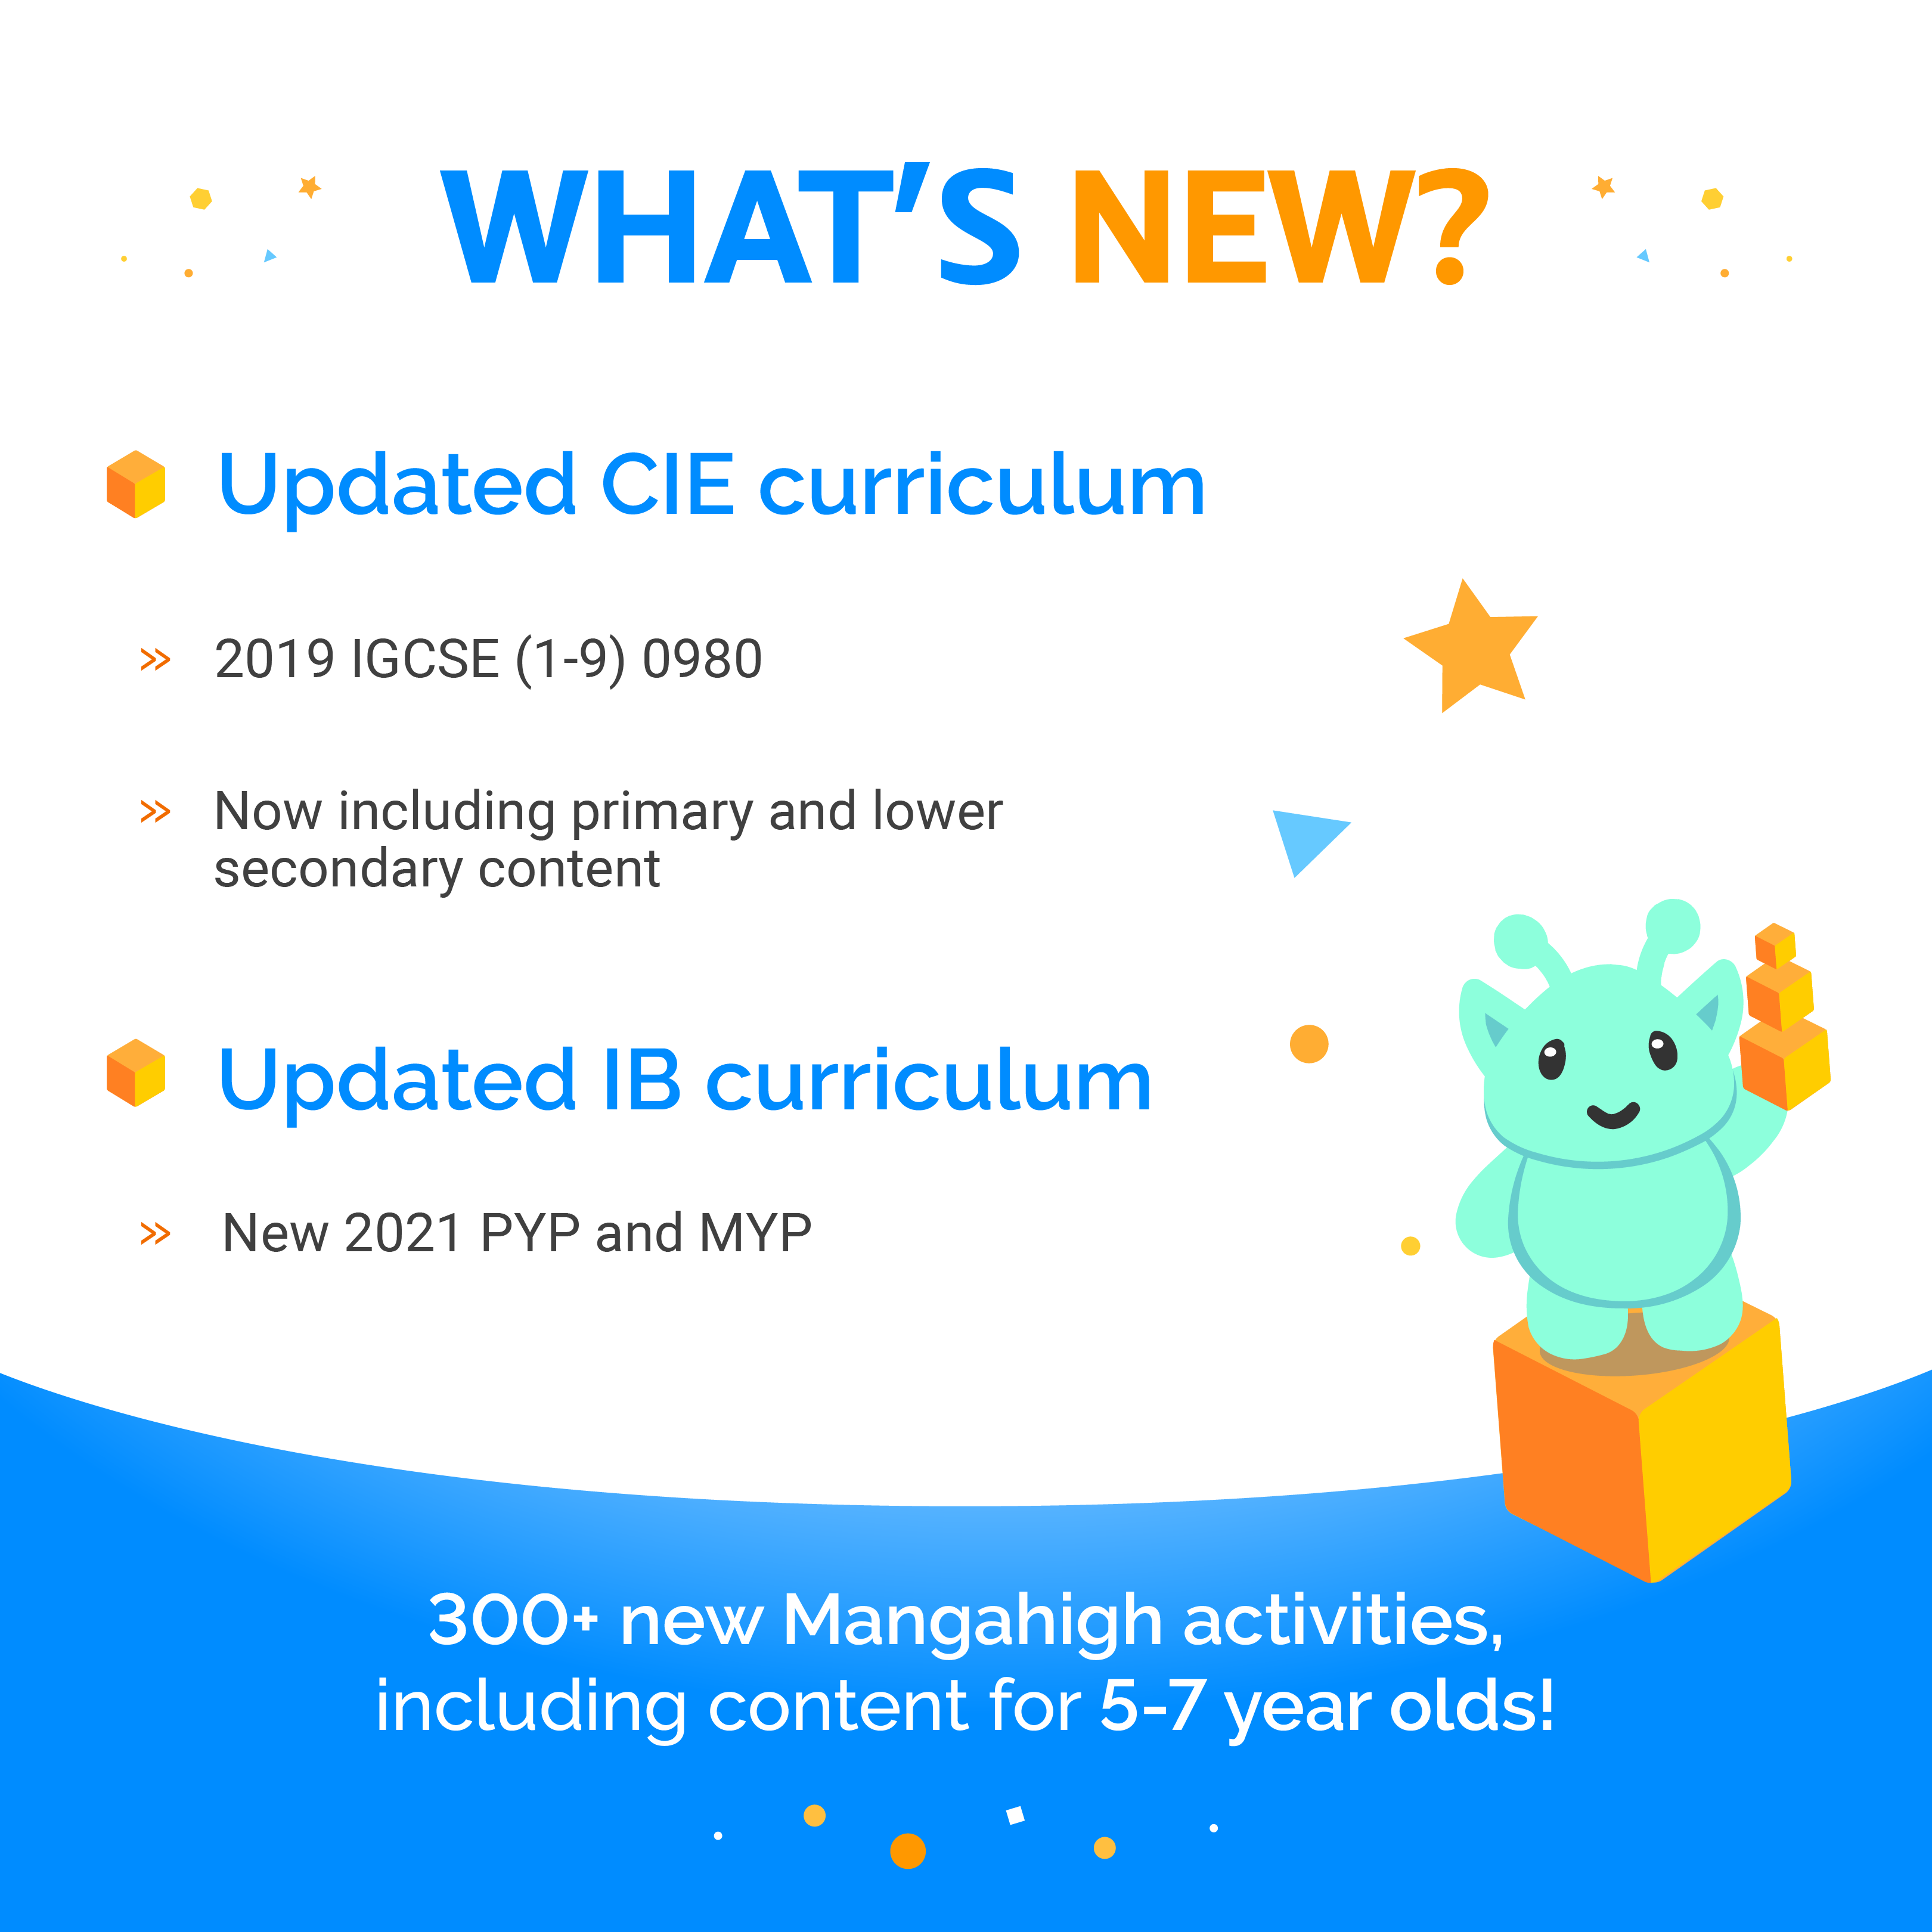 what's new? Updated CIE curriculum, 2019 IGCSE (1-0) 0980. Now including primary and lower secondary content. Updated IB curriculum, new 2021 PYP and MYP. 300+ new Manahigh activities, including content for 5-7 year old